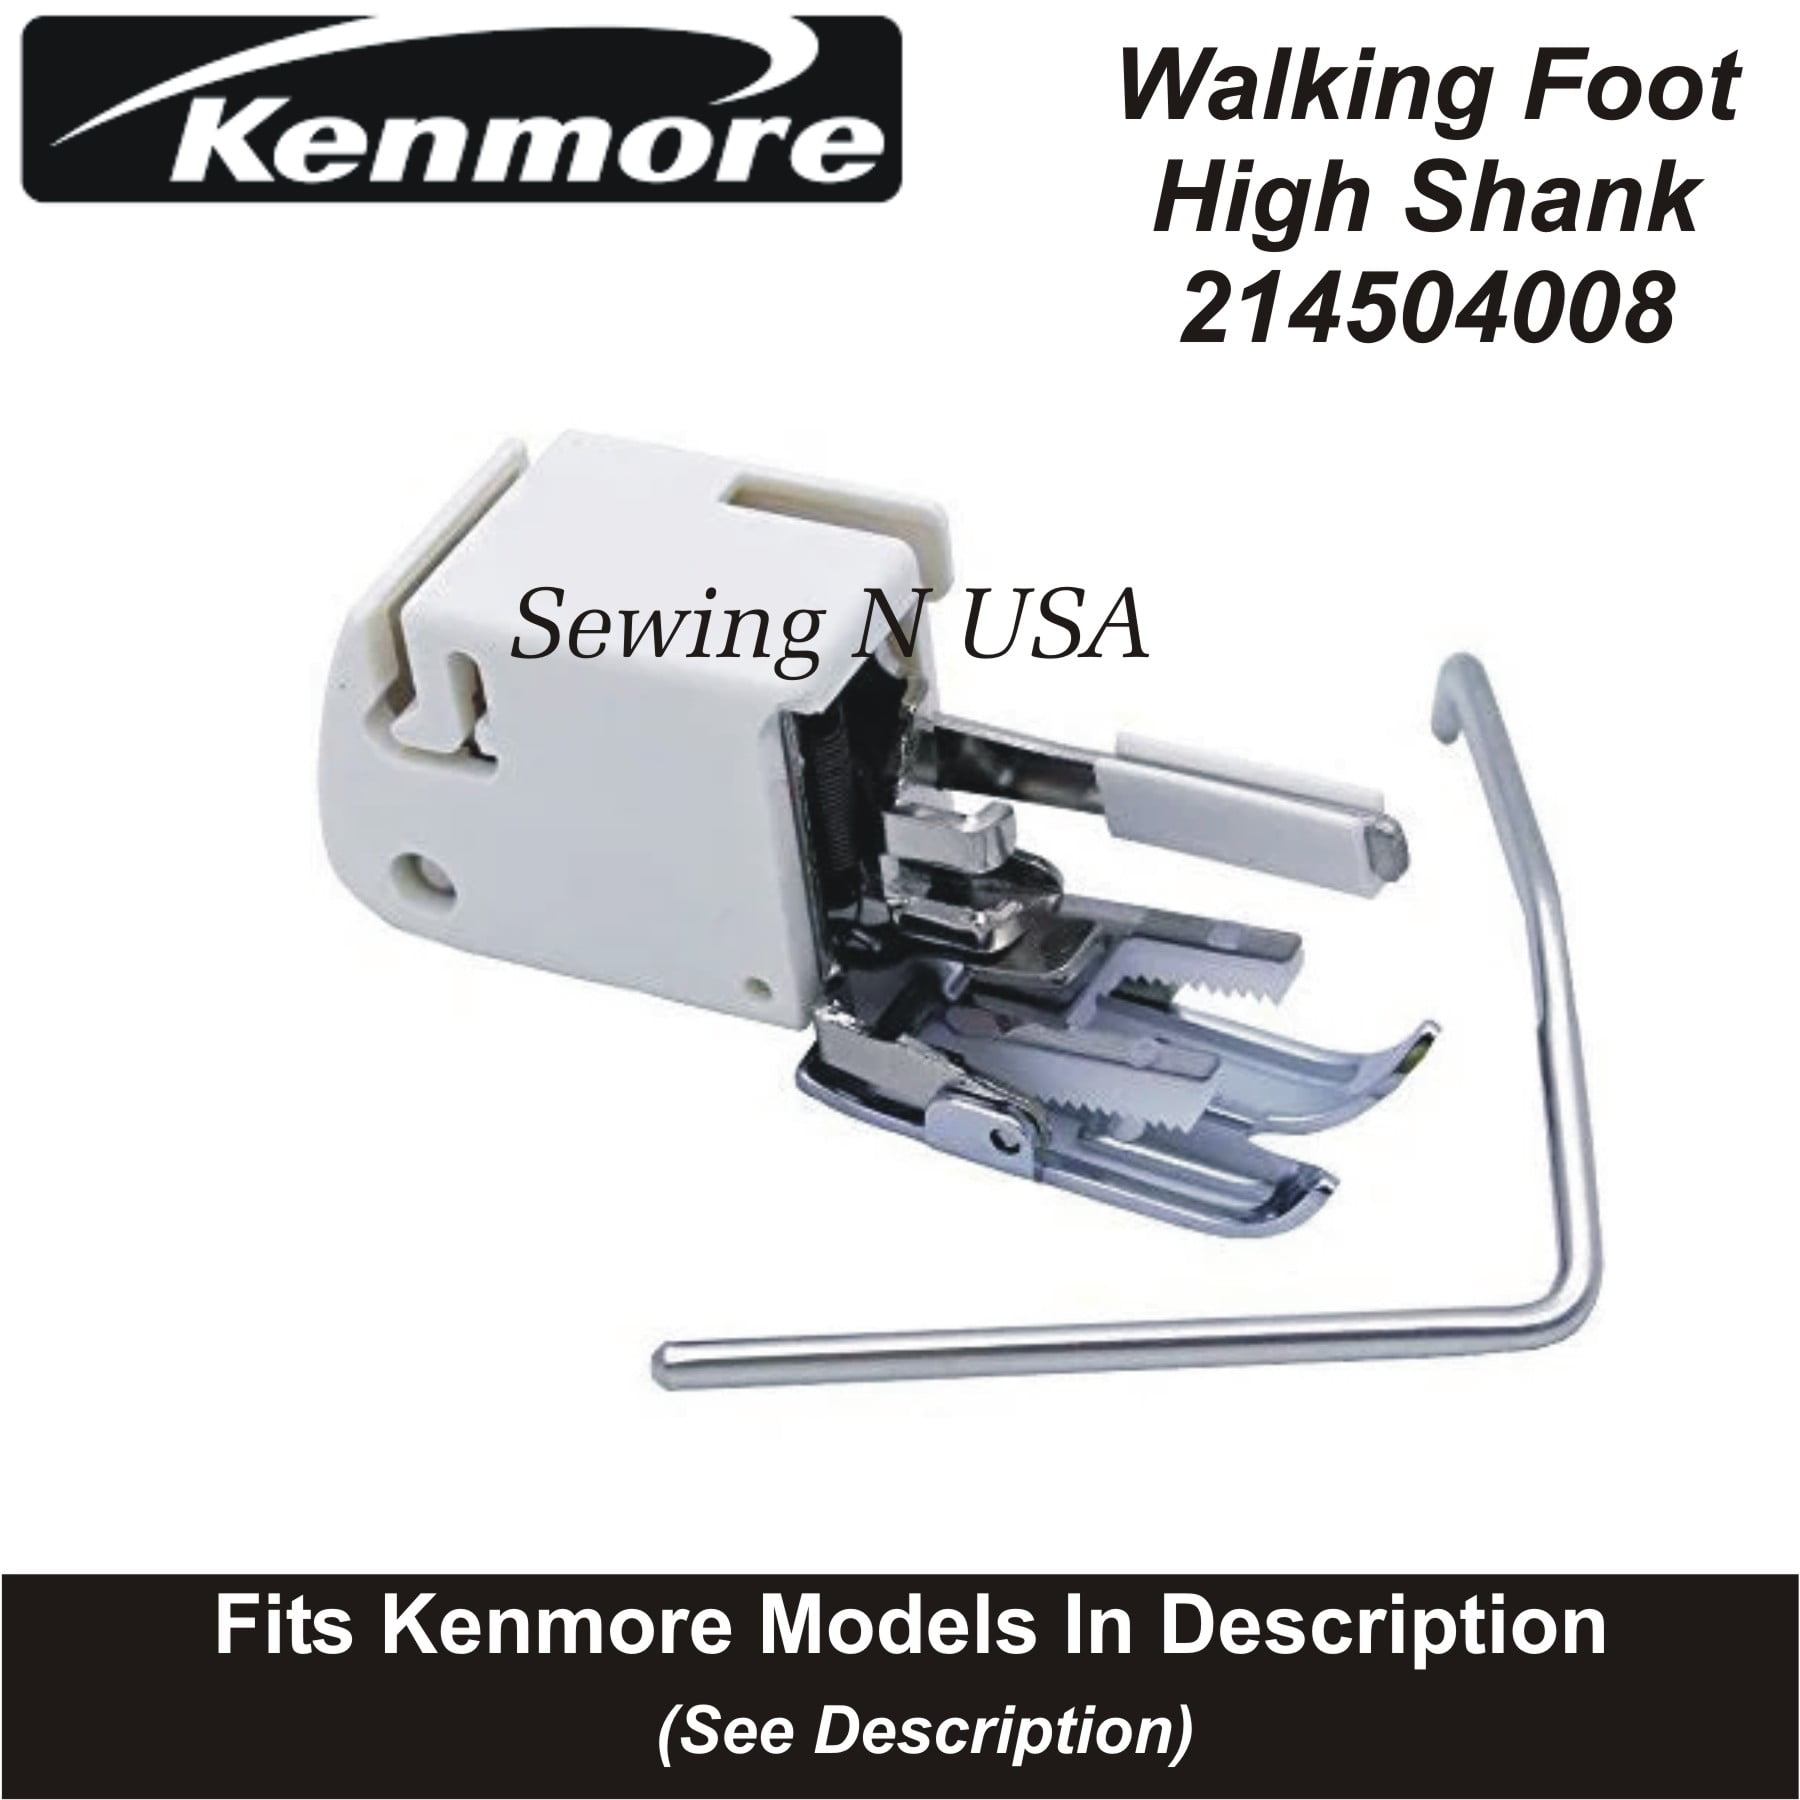 Low Shank Even Feed Walking Foot That Fits Kenmore Sewing Machine 385 Models 